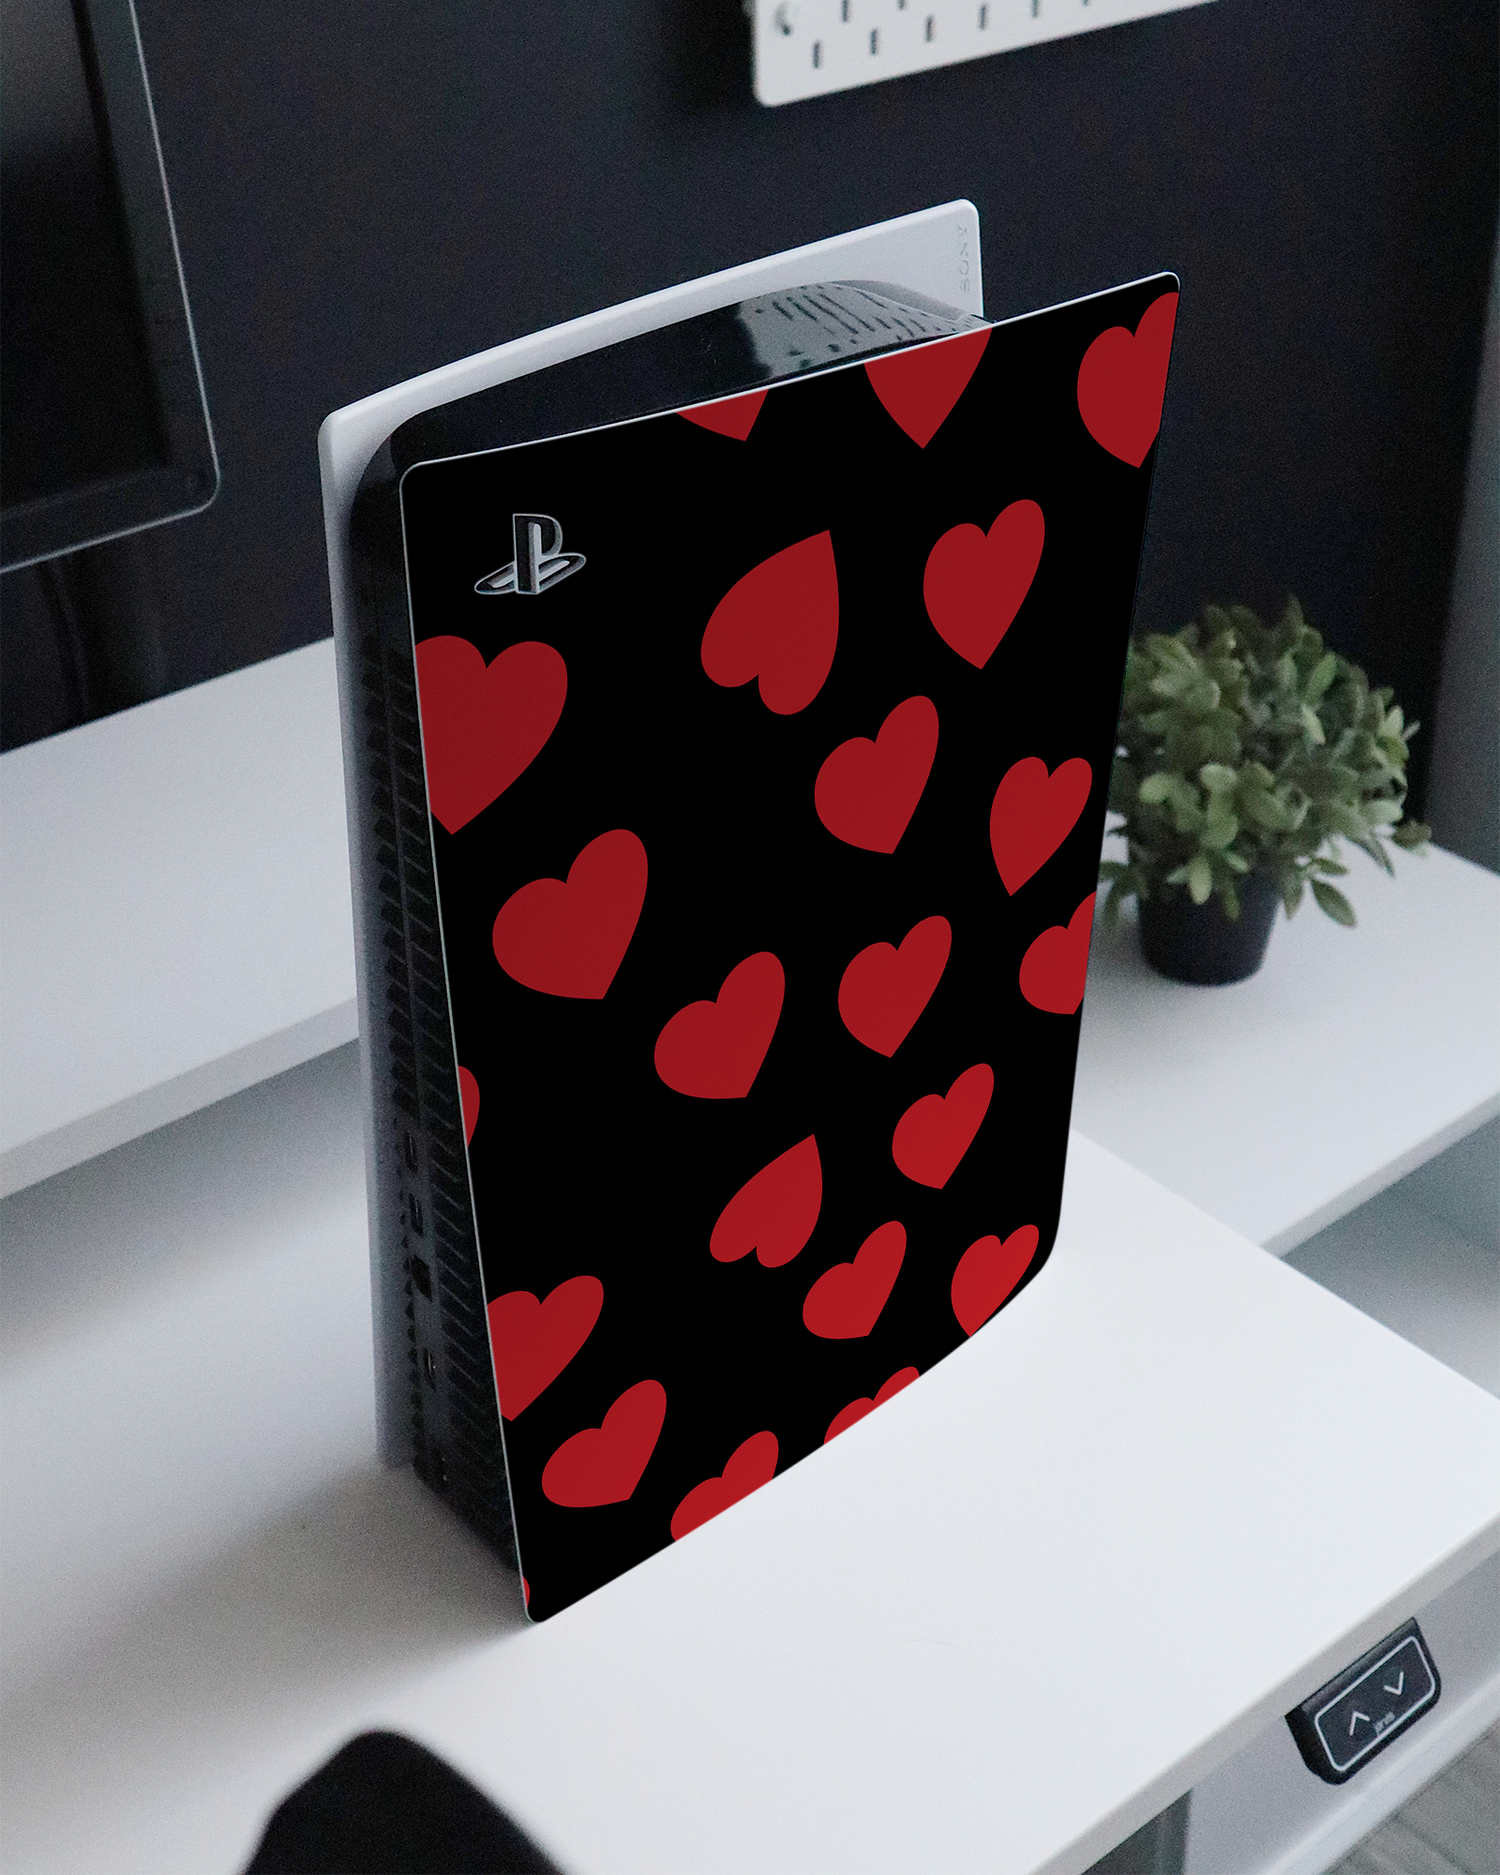 Repeating Hearts Console Skin for Sony PlayStation 5 standing on a sideboard 